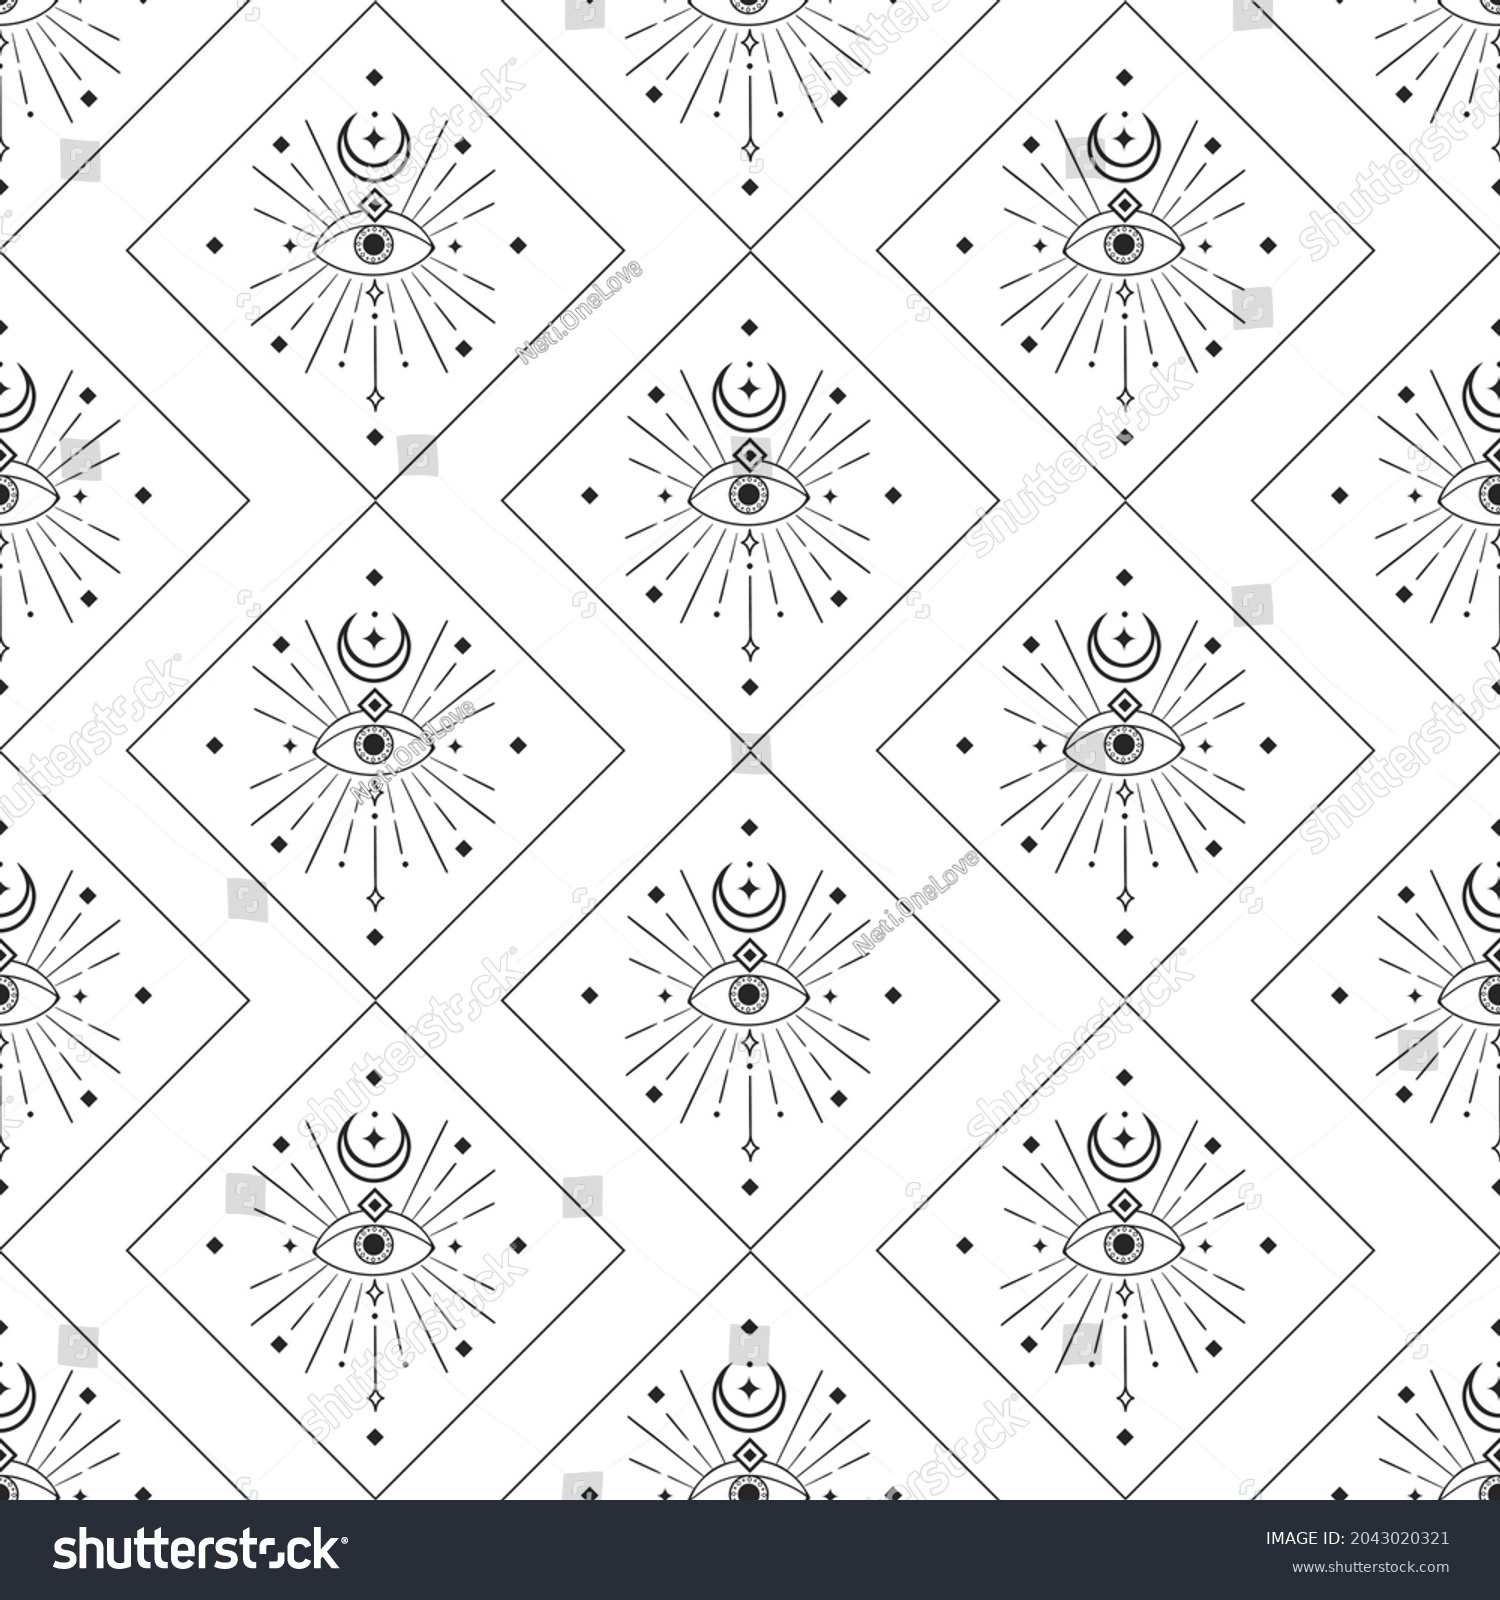 SVG of Abstract Background Seamless Pattern with Crescents, Eyes, rectangles, squares. Mystic Design, Vector Illustration for wrapping tissue paper. svg